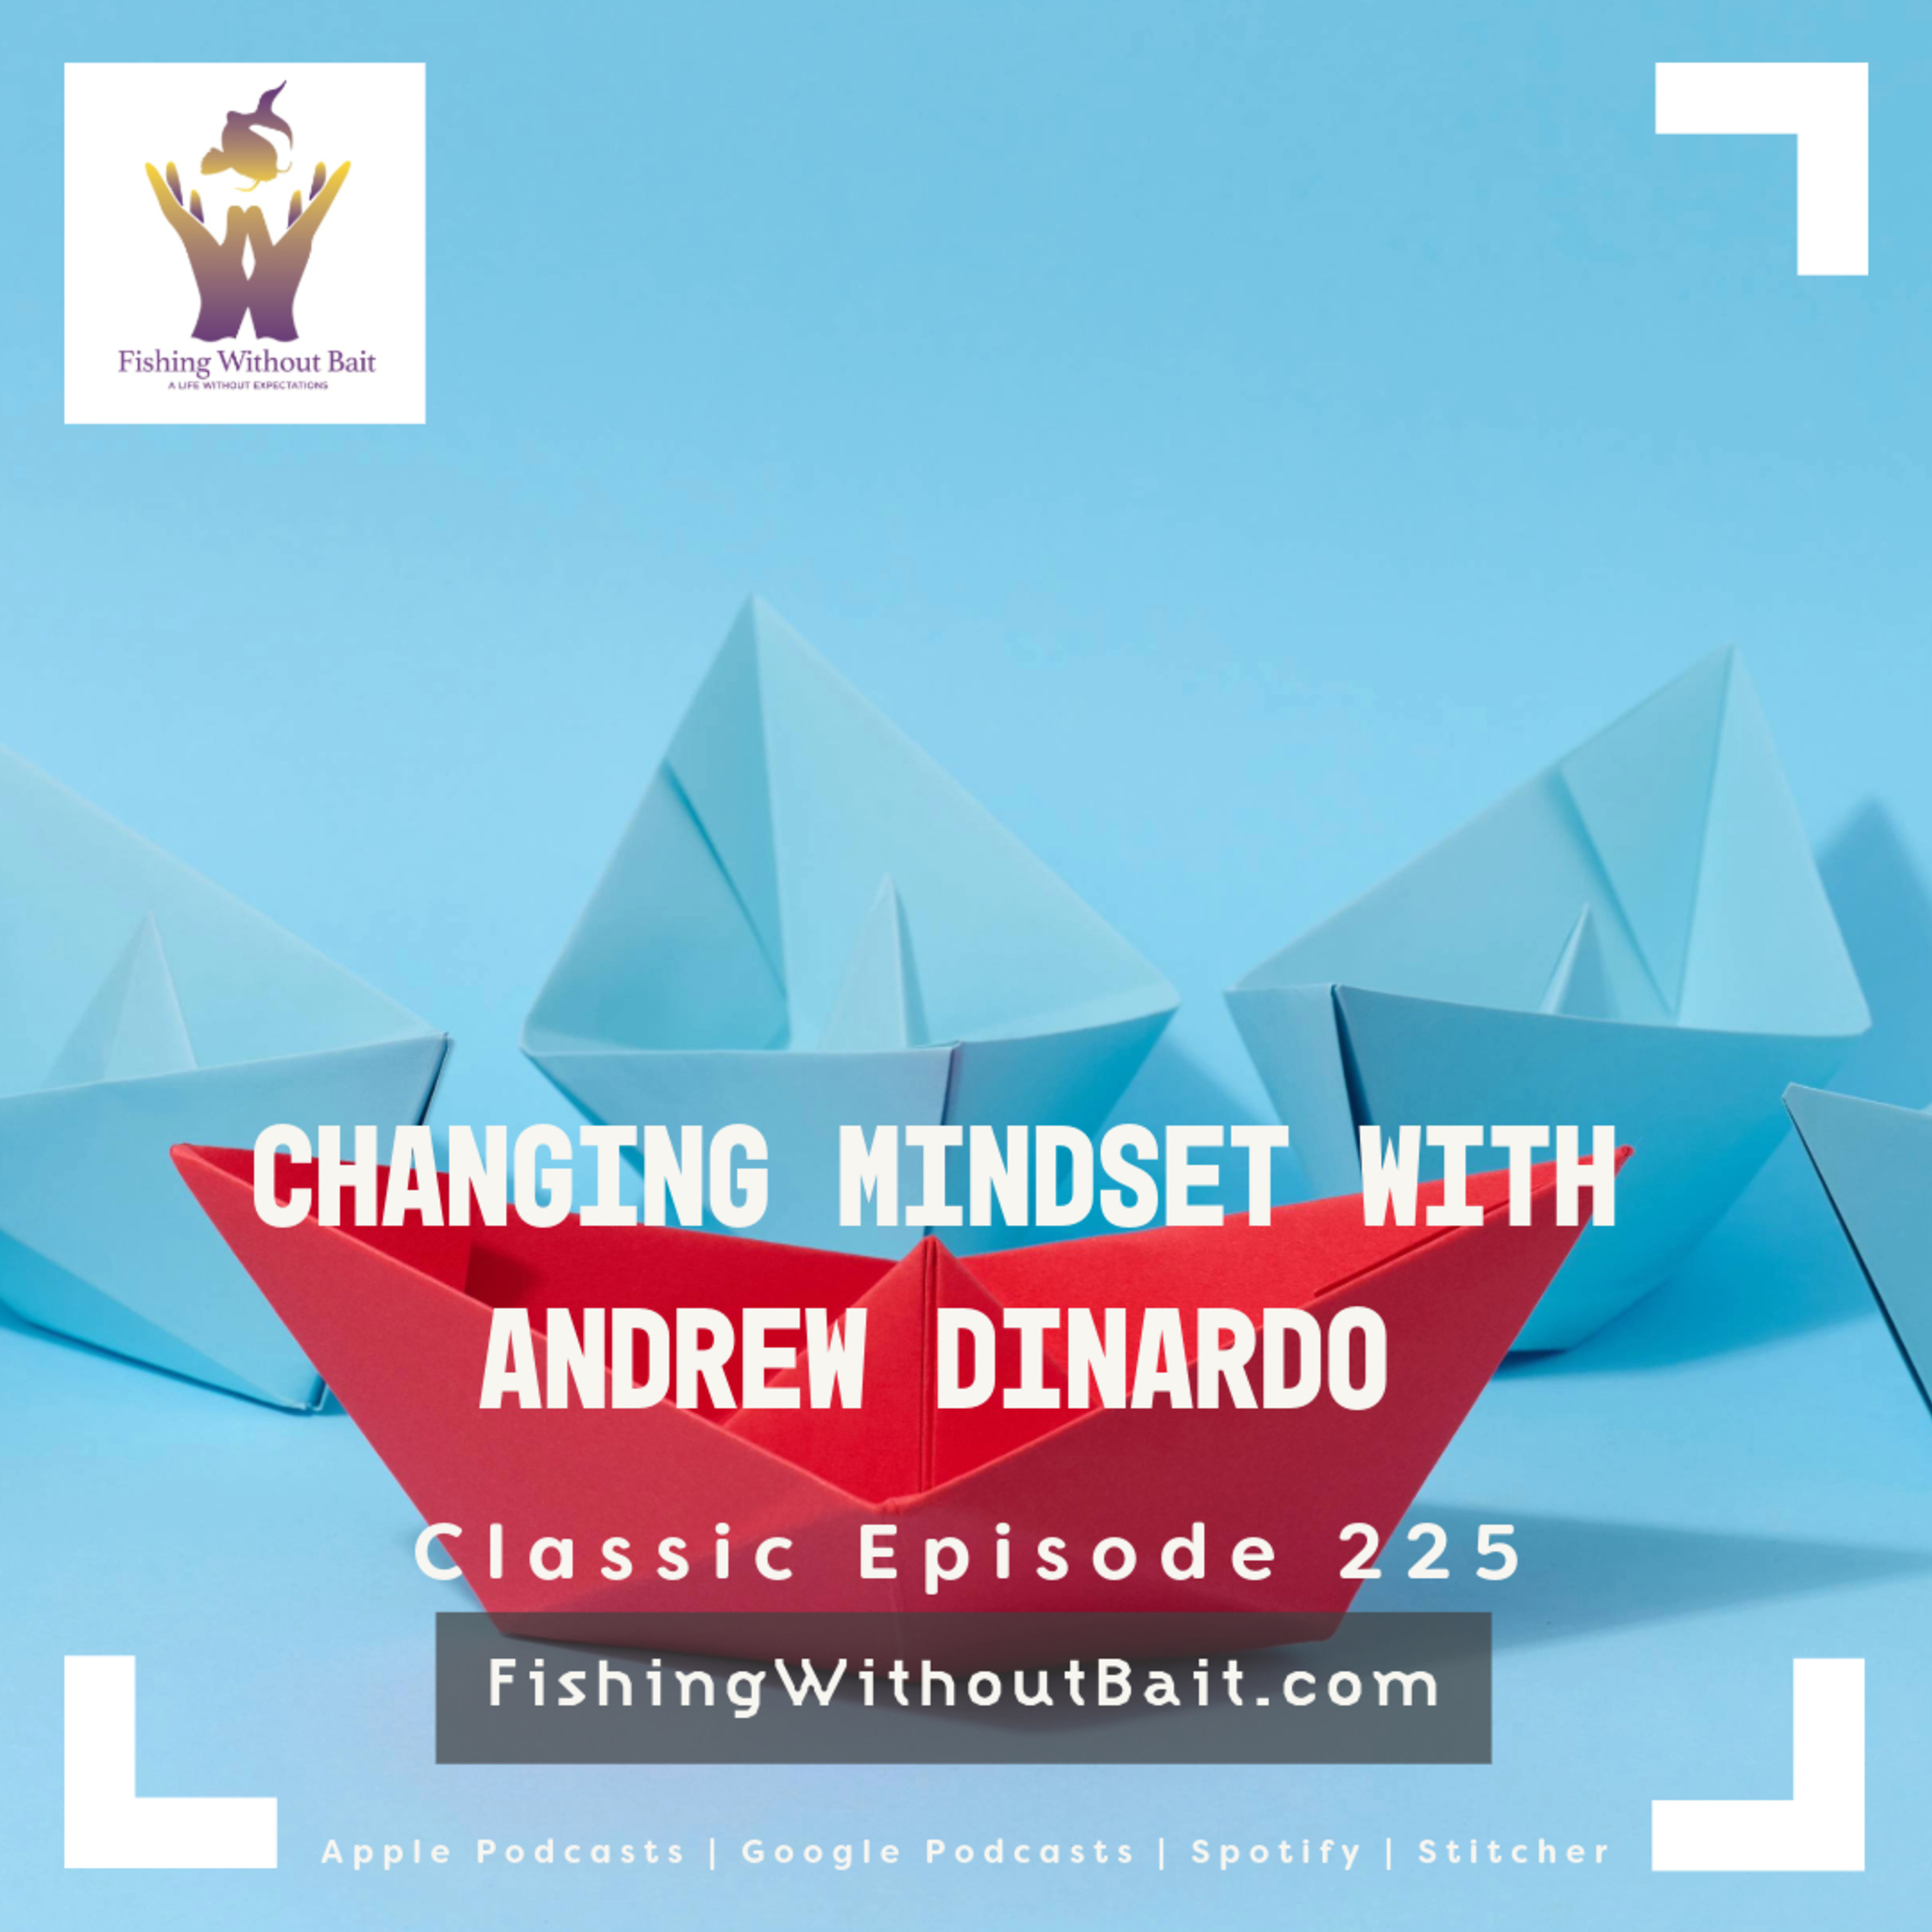 Classic Fishing Without Bait 225: Changing Mindset with Andrew DiNardo